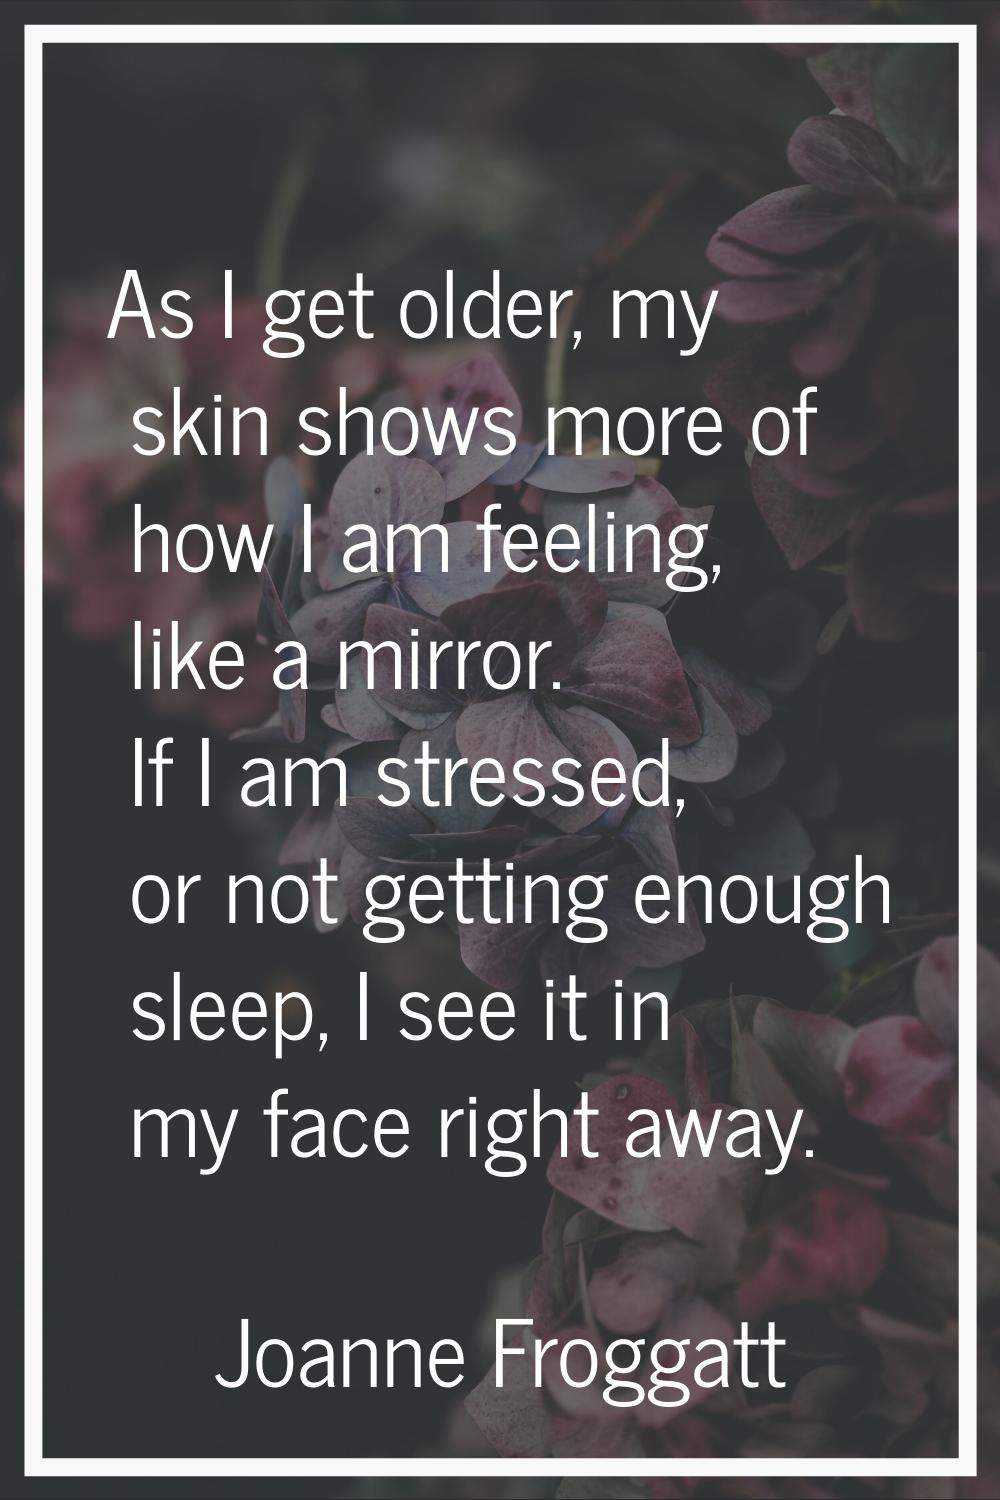 As I get older, my skin shows more of how I am feeling, like a mirror. If I am stressed, or not get